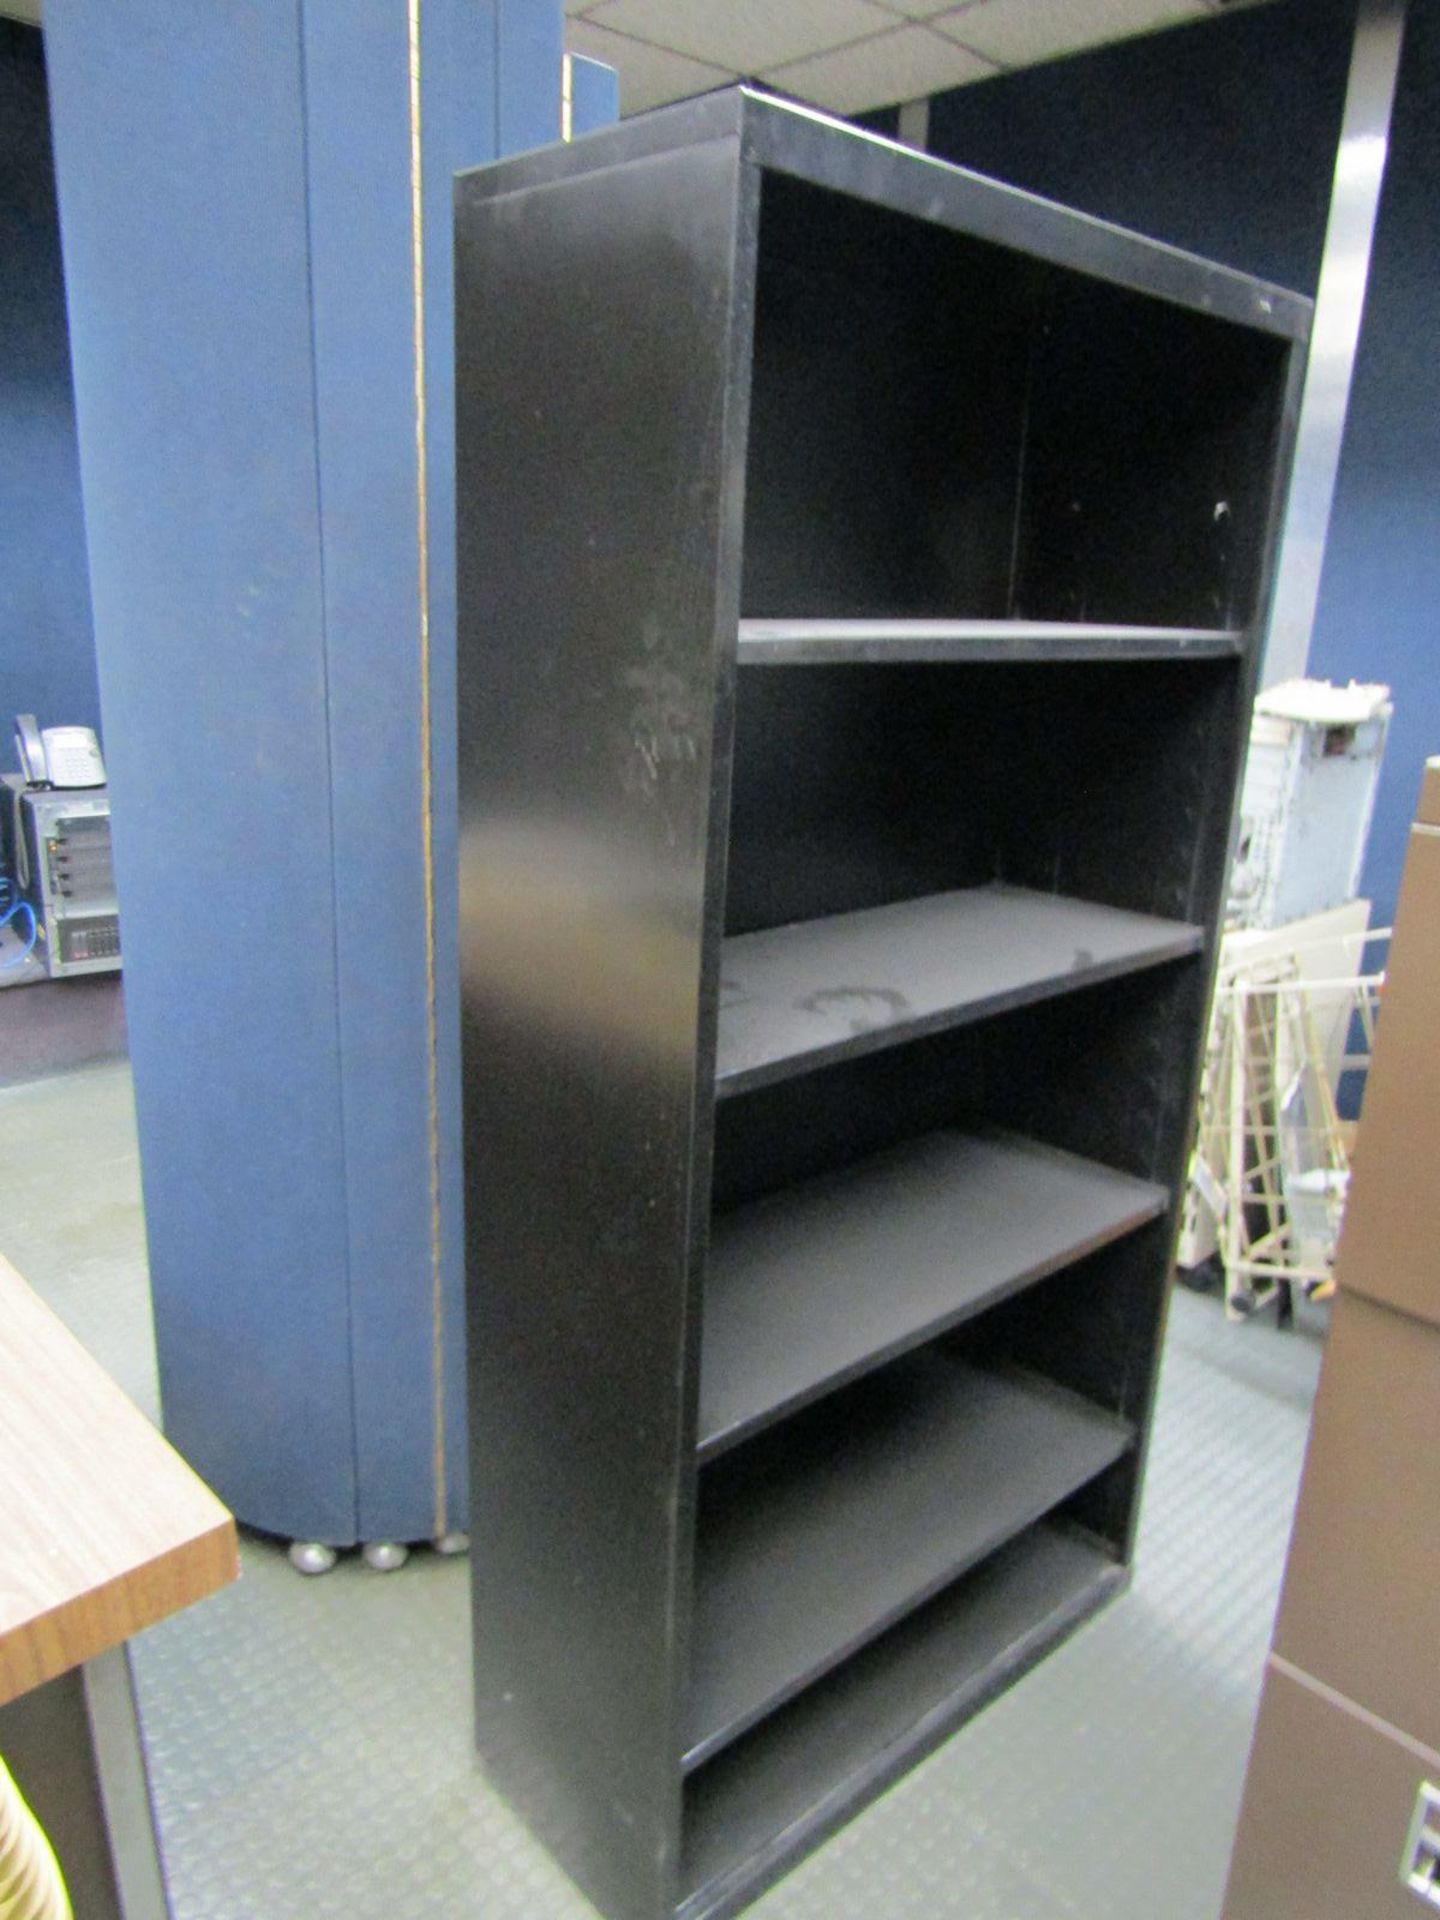 Lot - Remaining Contents of IT Room, to Include: Desks, Chairs, Filing Cabinets, Shelving Units, - Image 6 of 10